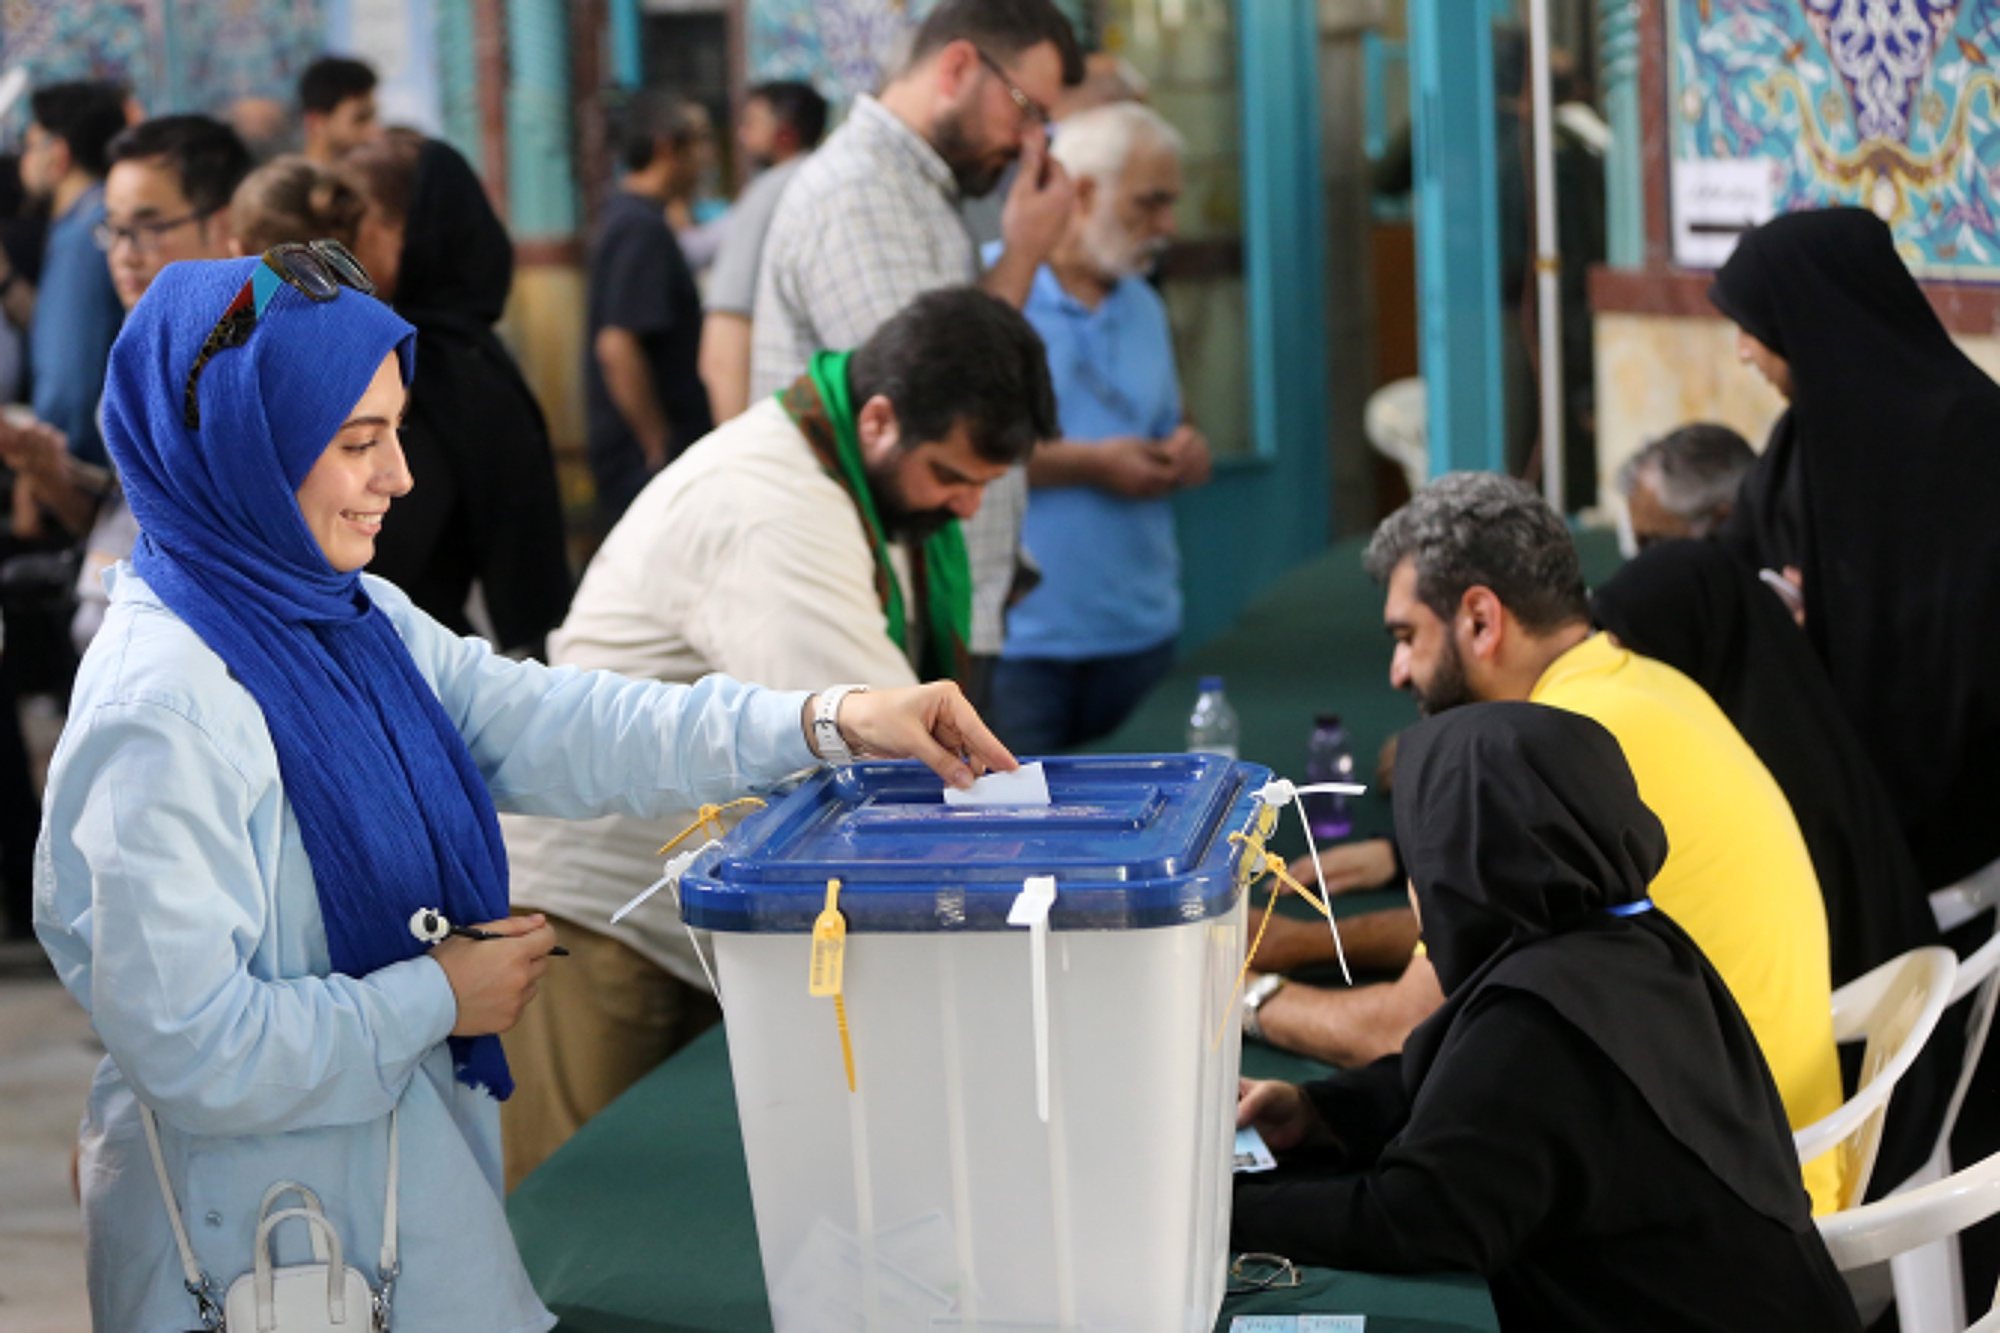 epa11443298 Iranians cast their votes in a polling station during the presidential election, in Tehran, Iran, 28 June 2024. Iran holds presidential elections on 28 June, following the death of late Iranian President Ebrahim Raisi in a helicopter crash on 19 May 2024.  EPA/STRINGER